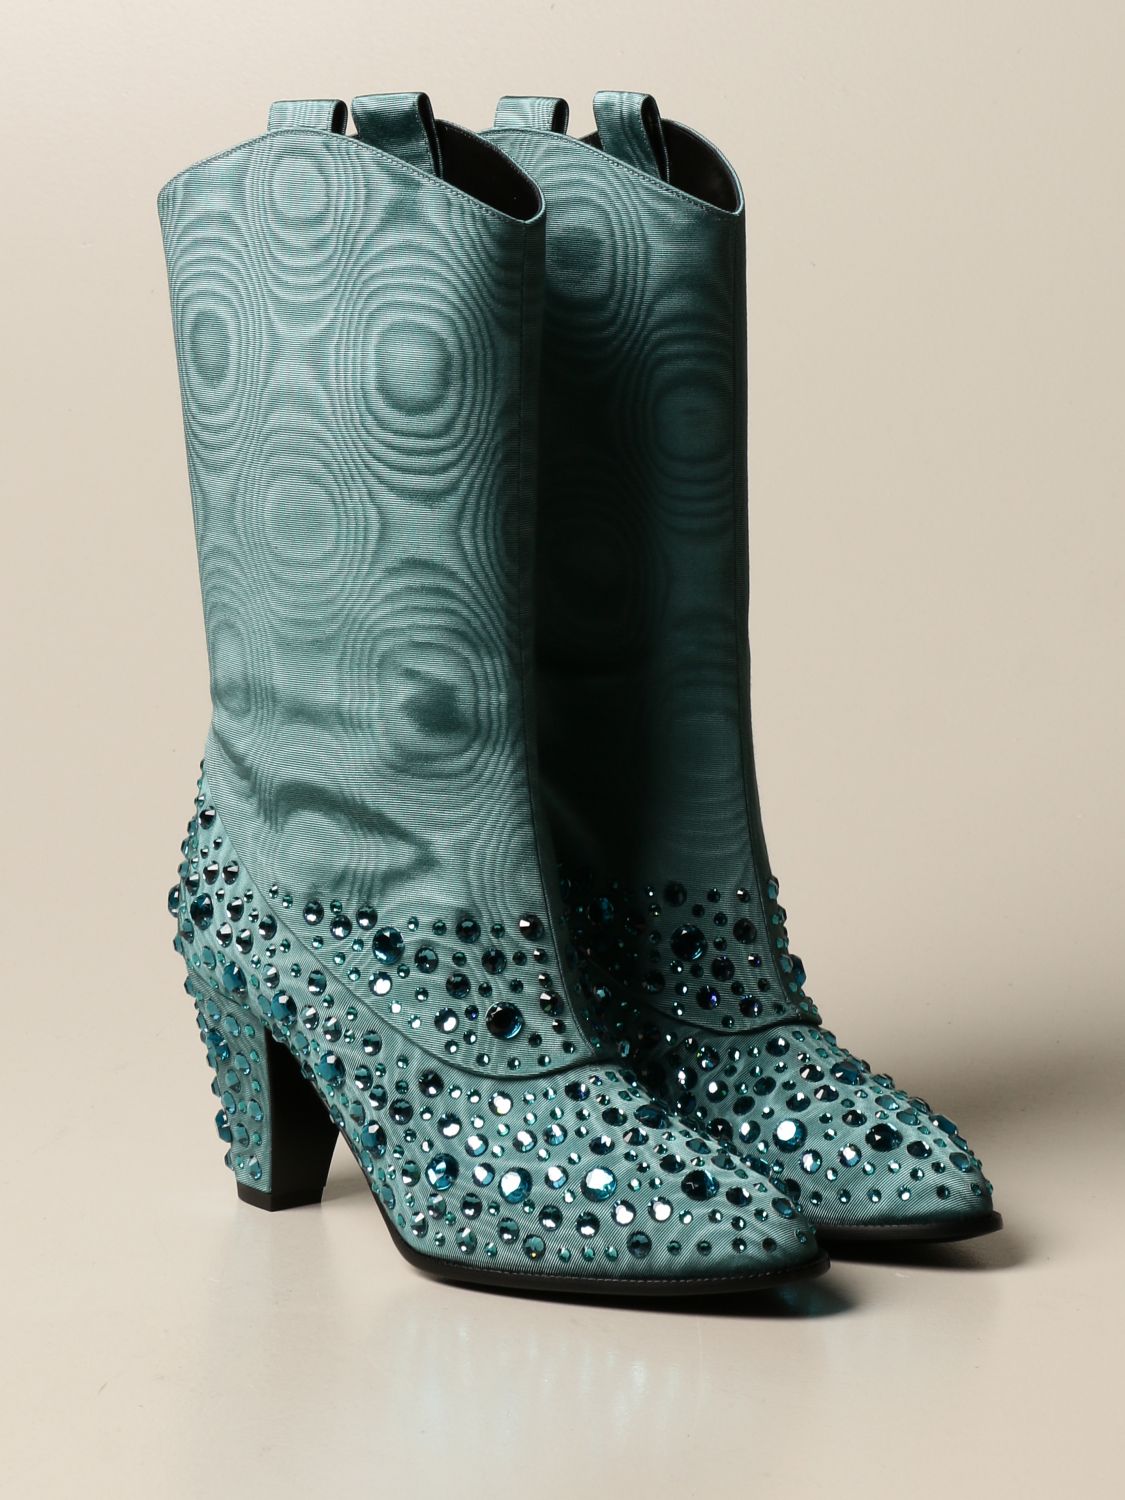 Gucci cowgirl boots